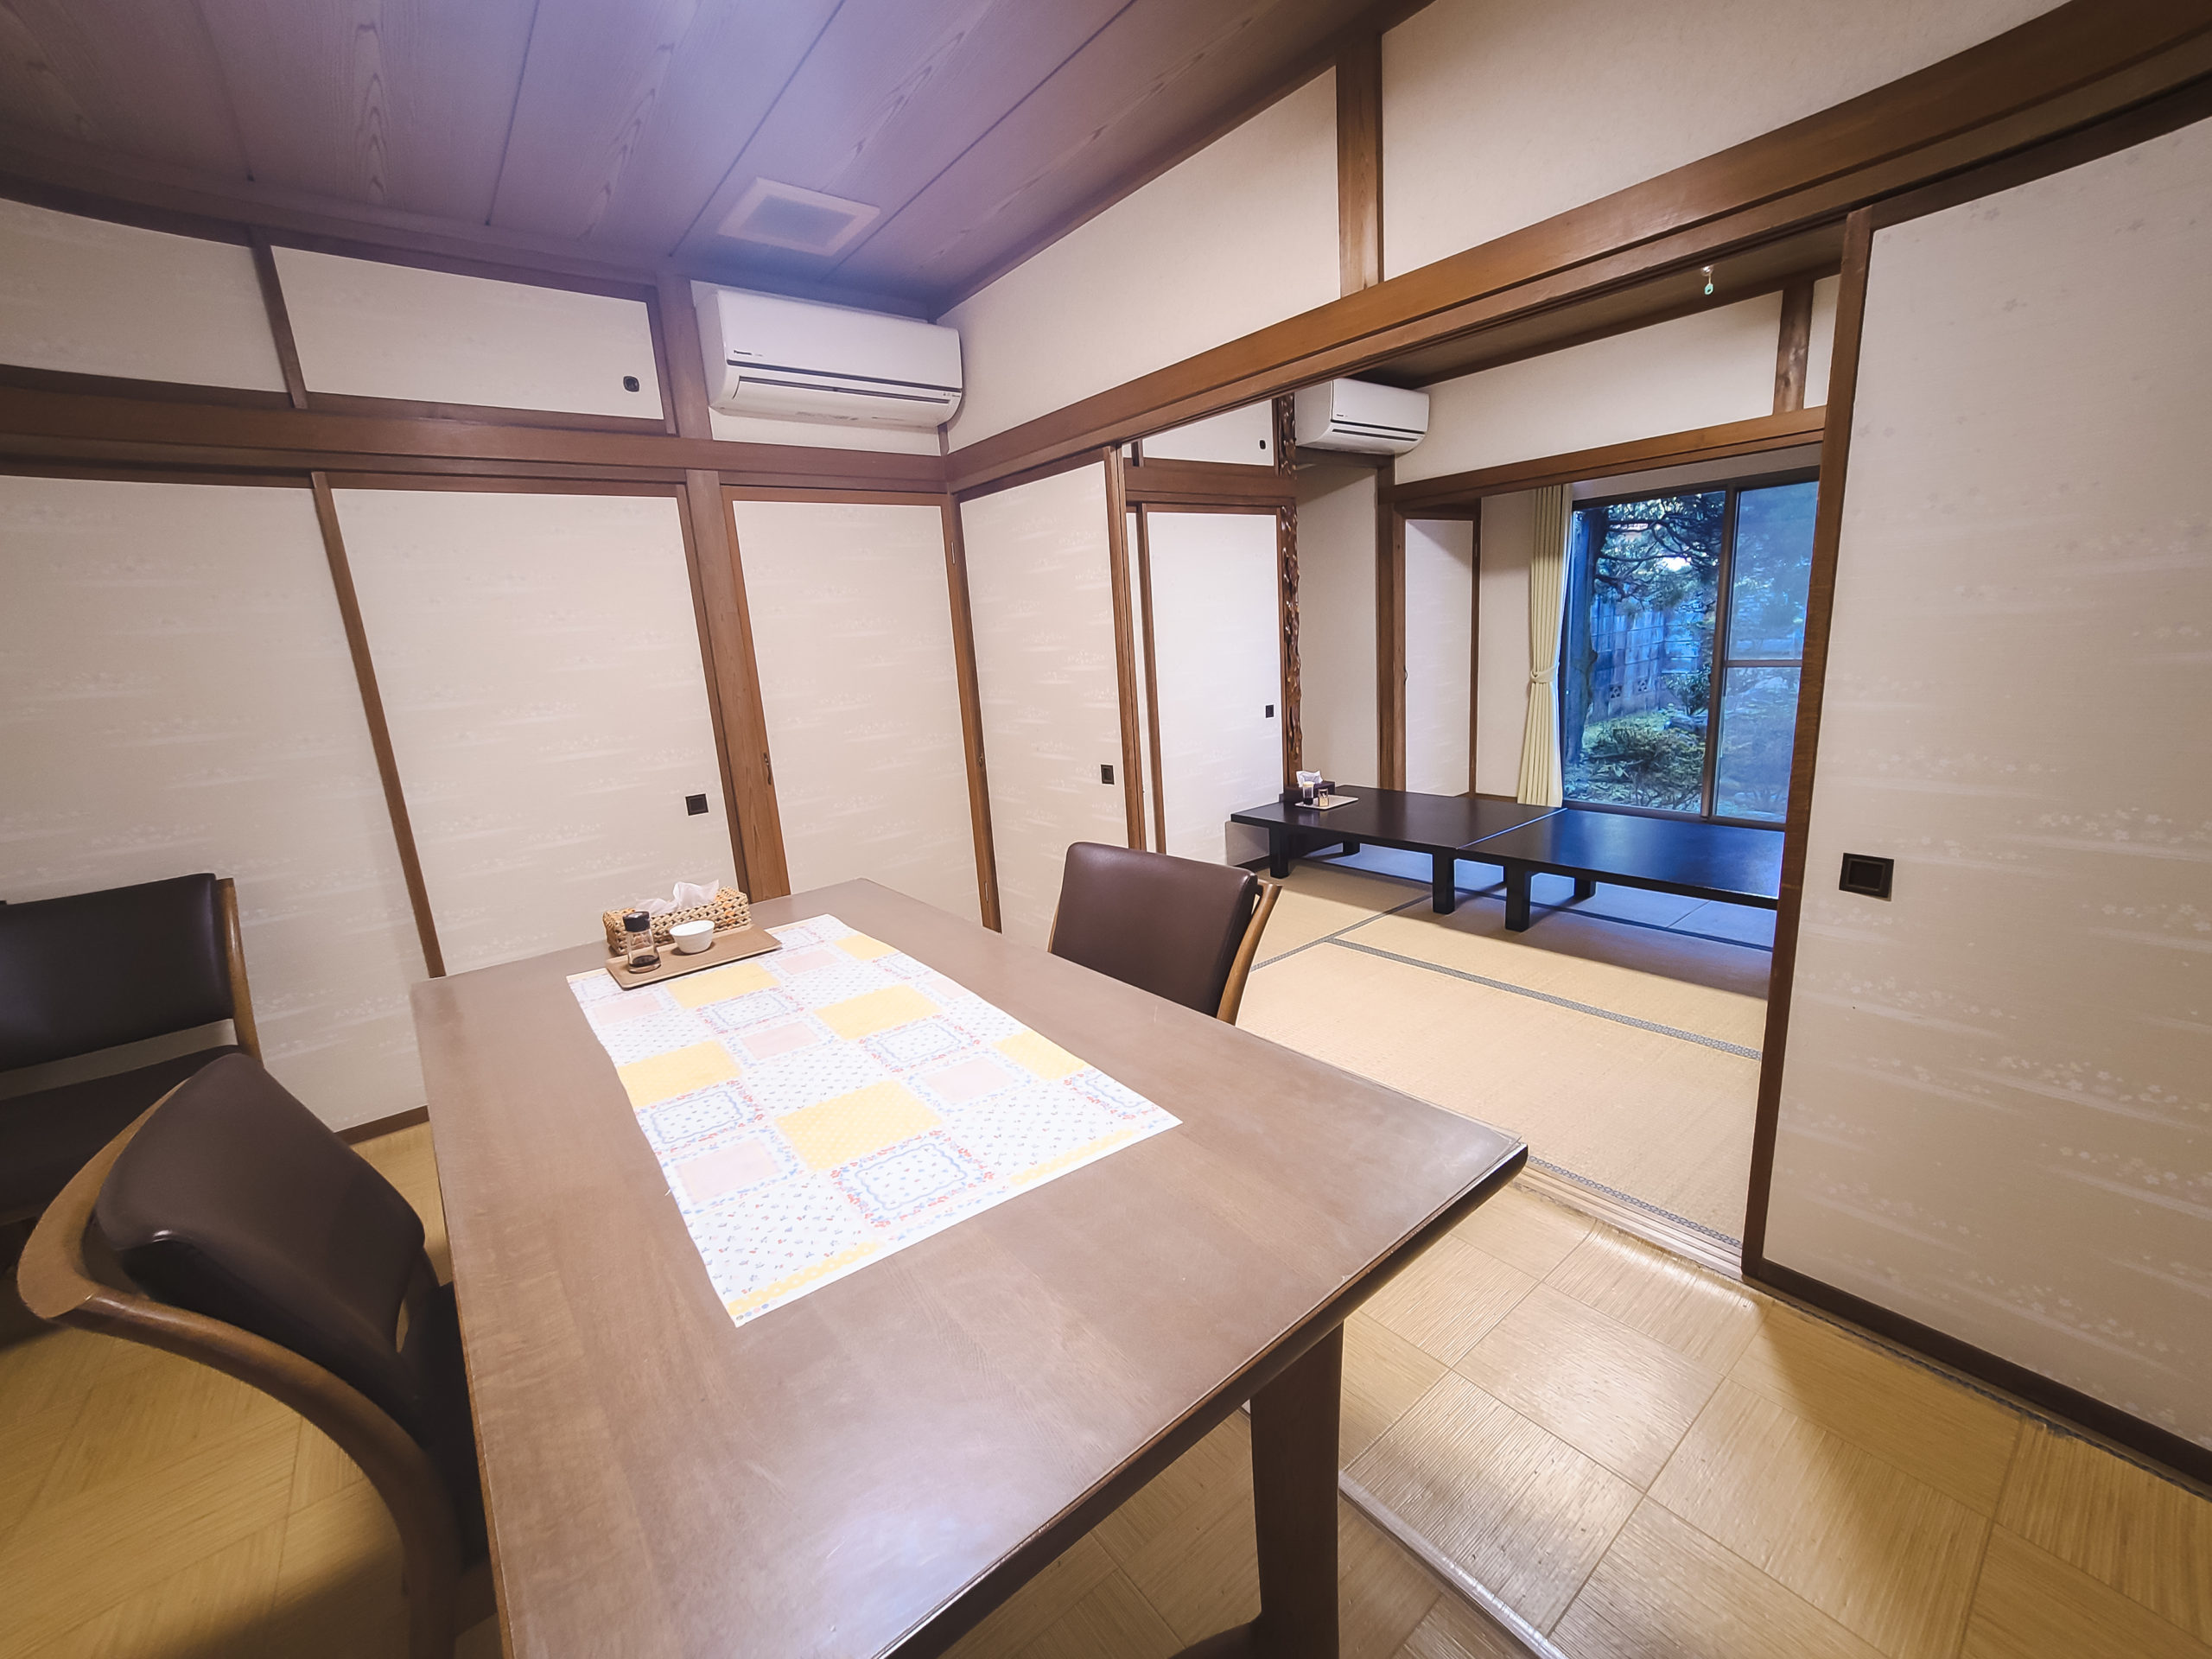 The two enkai party rooms have regular-height tables as well as seiza tables available 